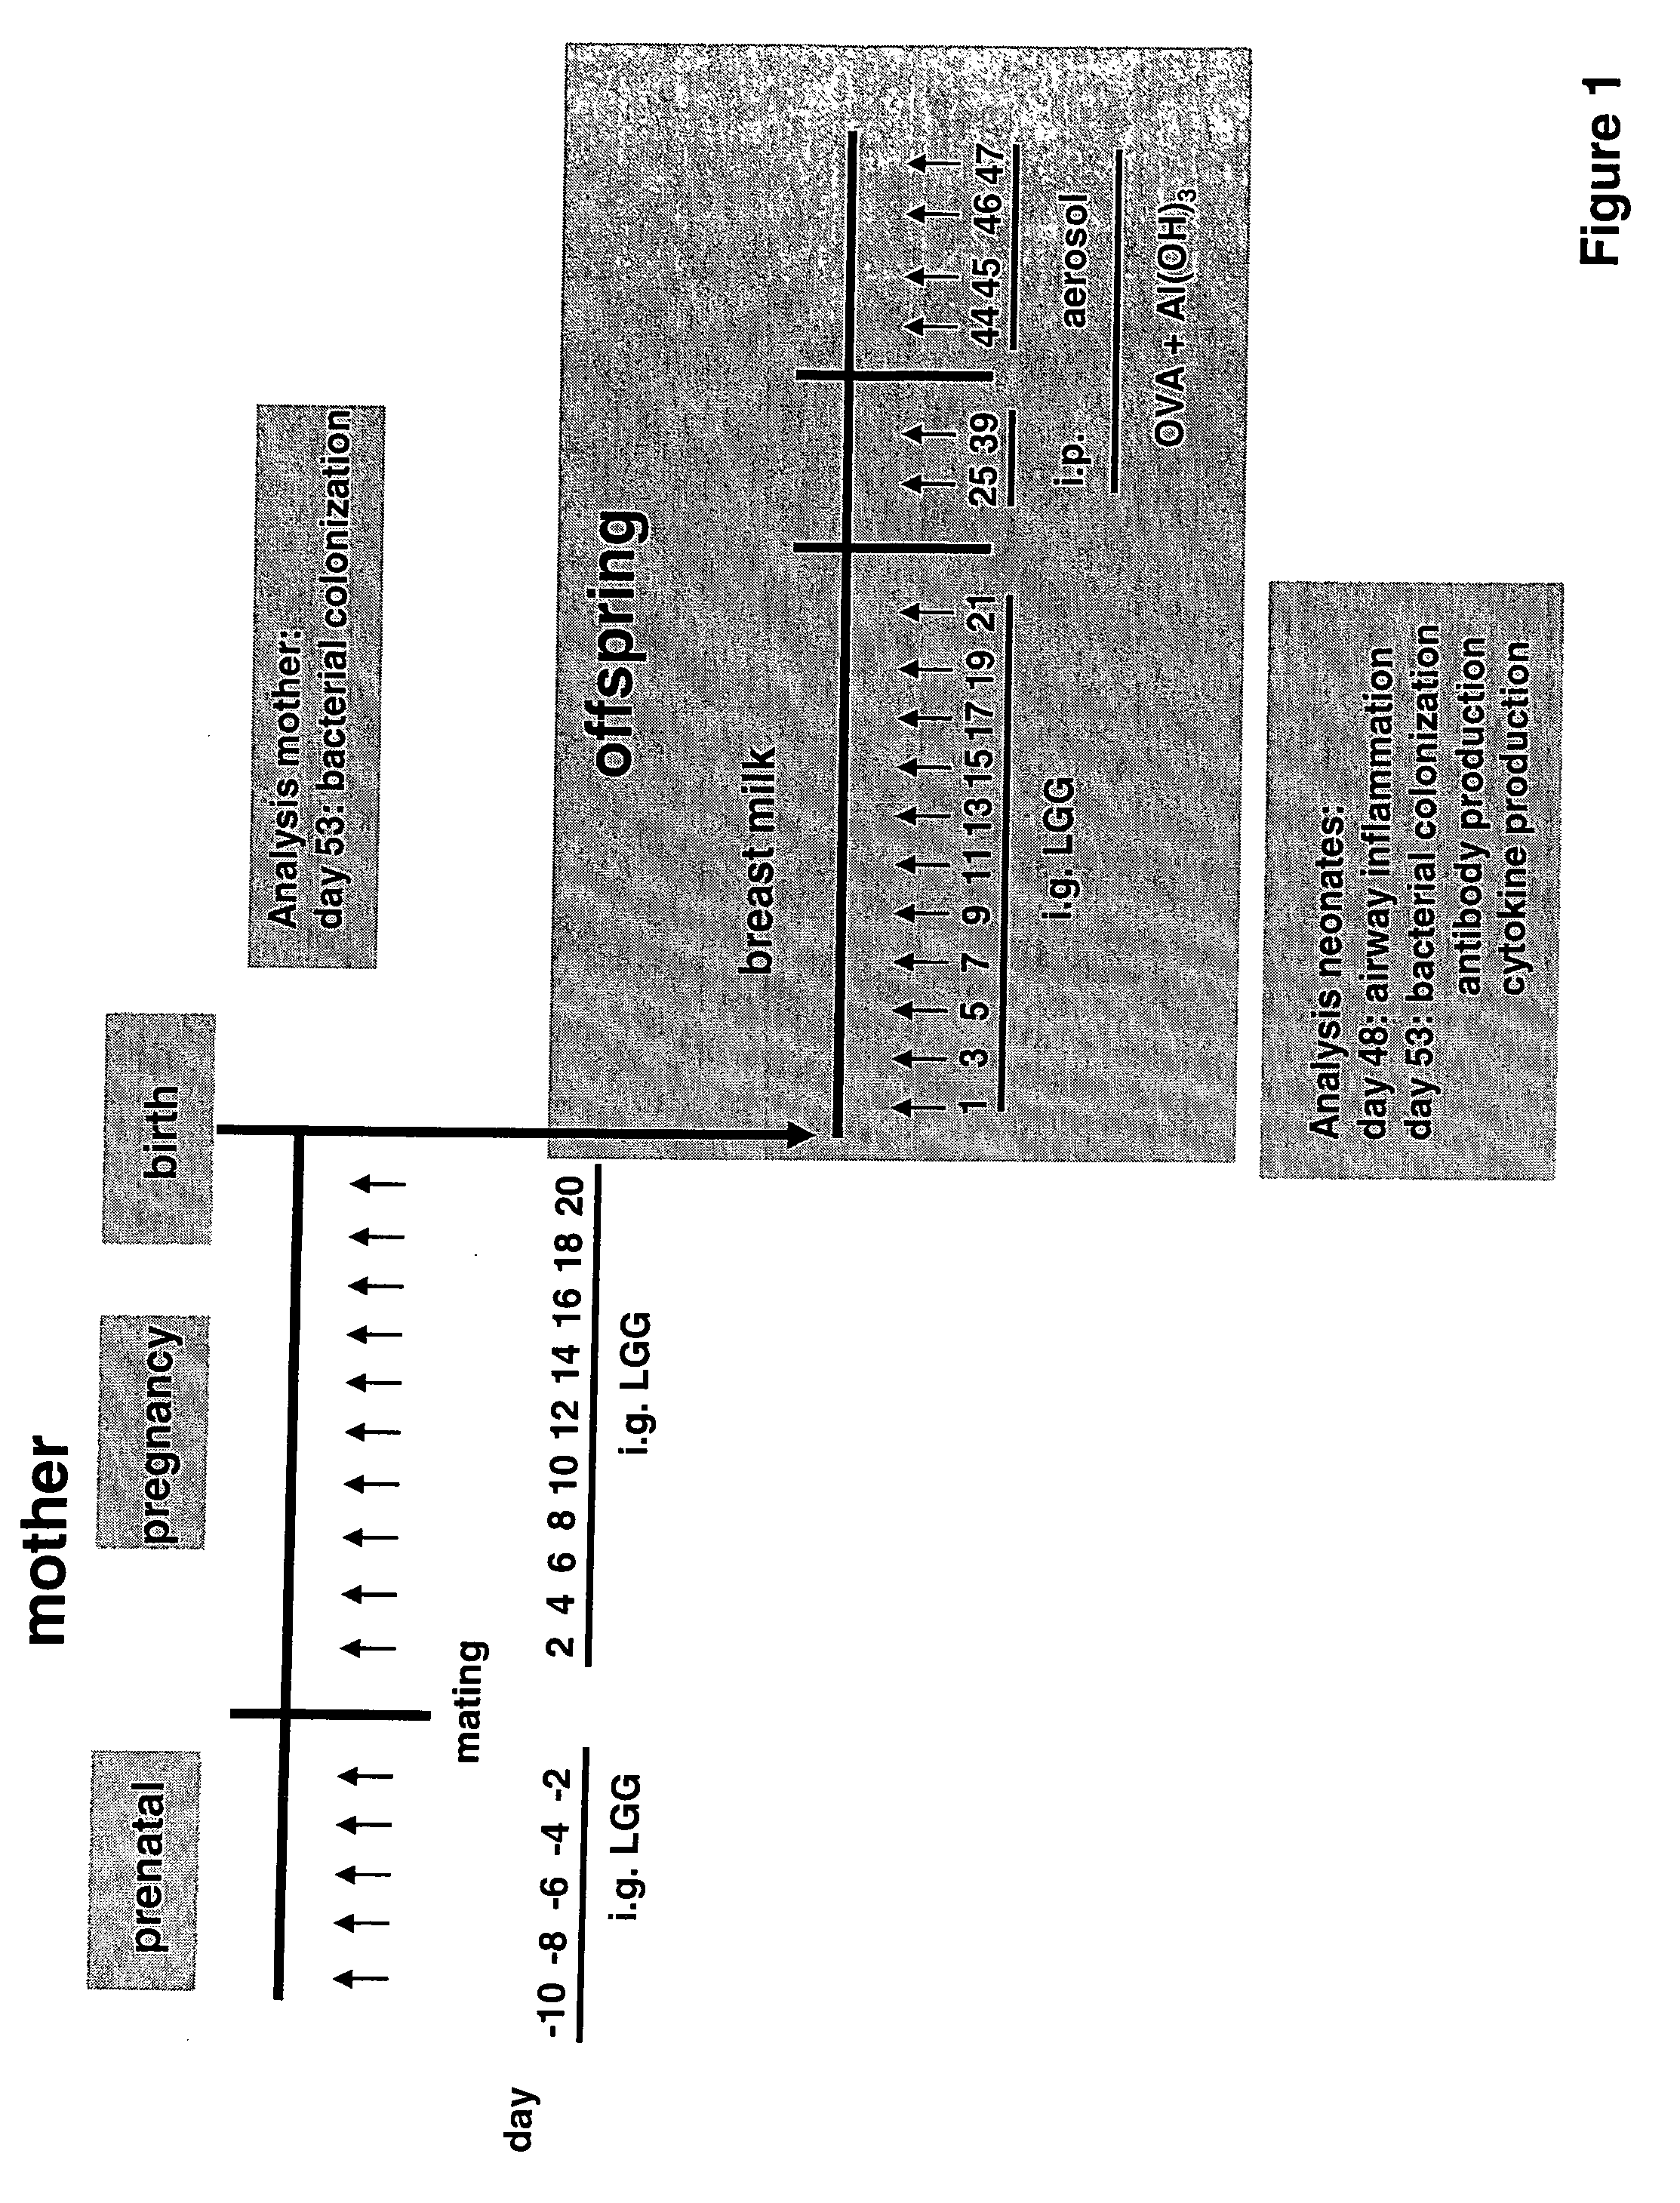 Method for preventing or treating the development of respiratory allergies